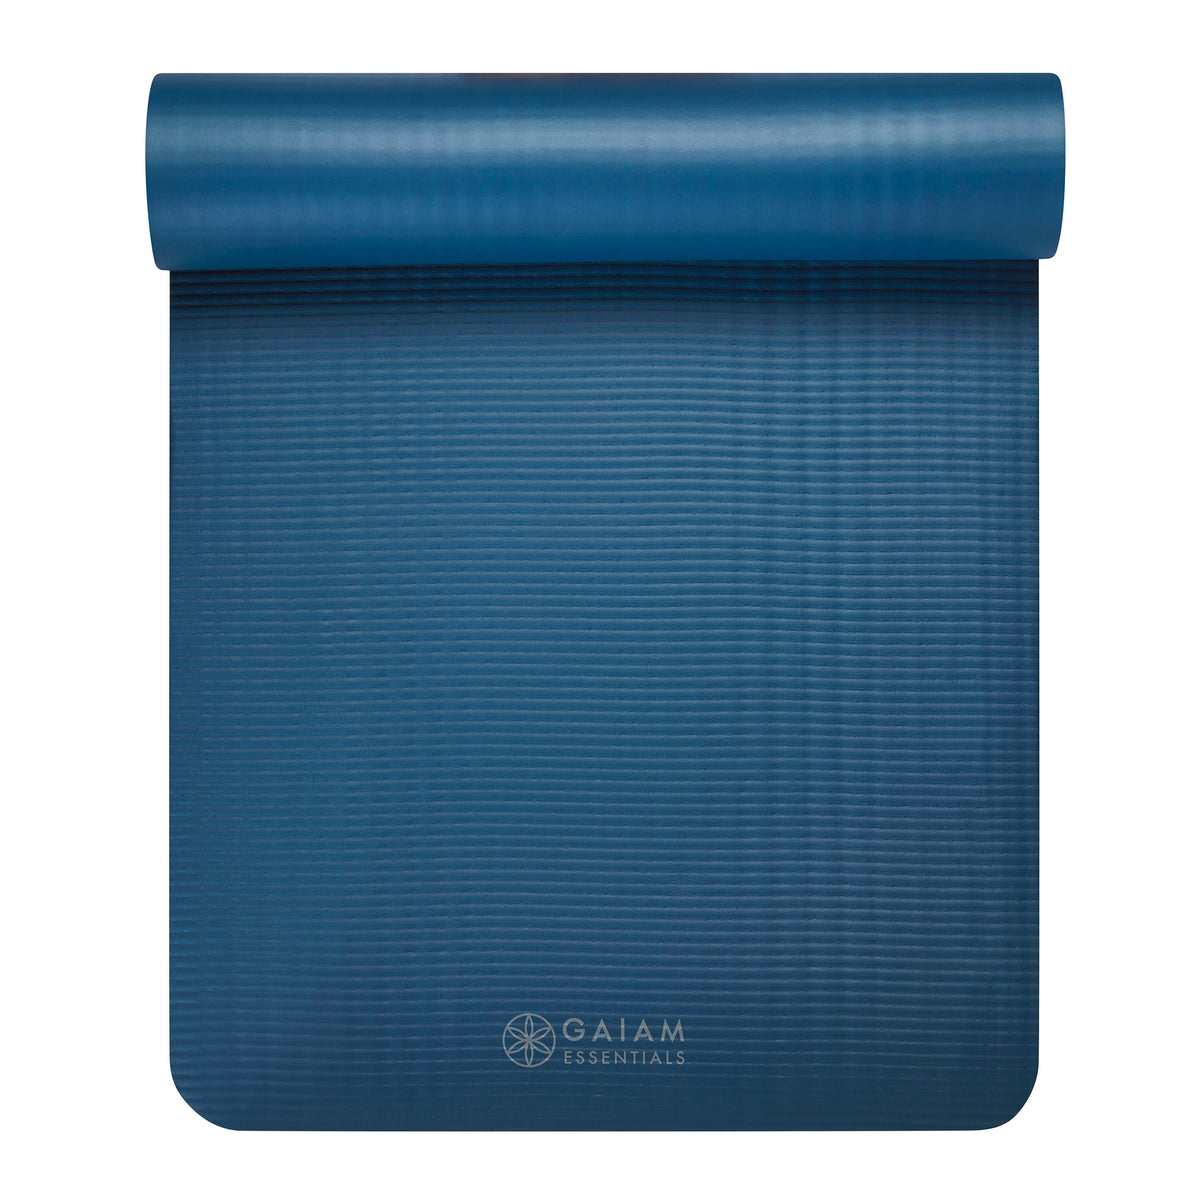 Gaiam Essentials Fitness Mat & Sling (10mm) navy top rolled